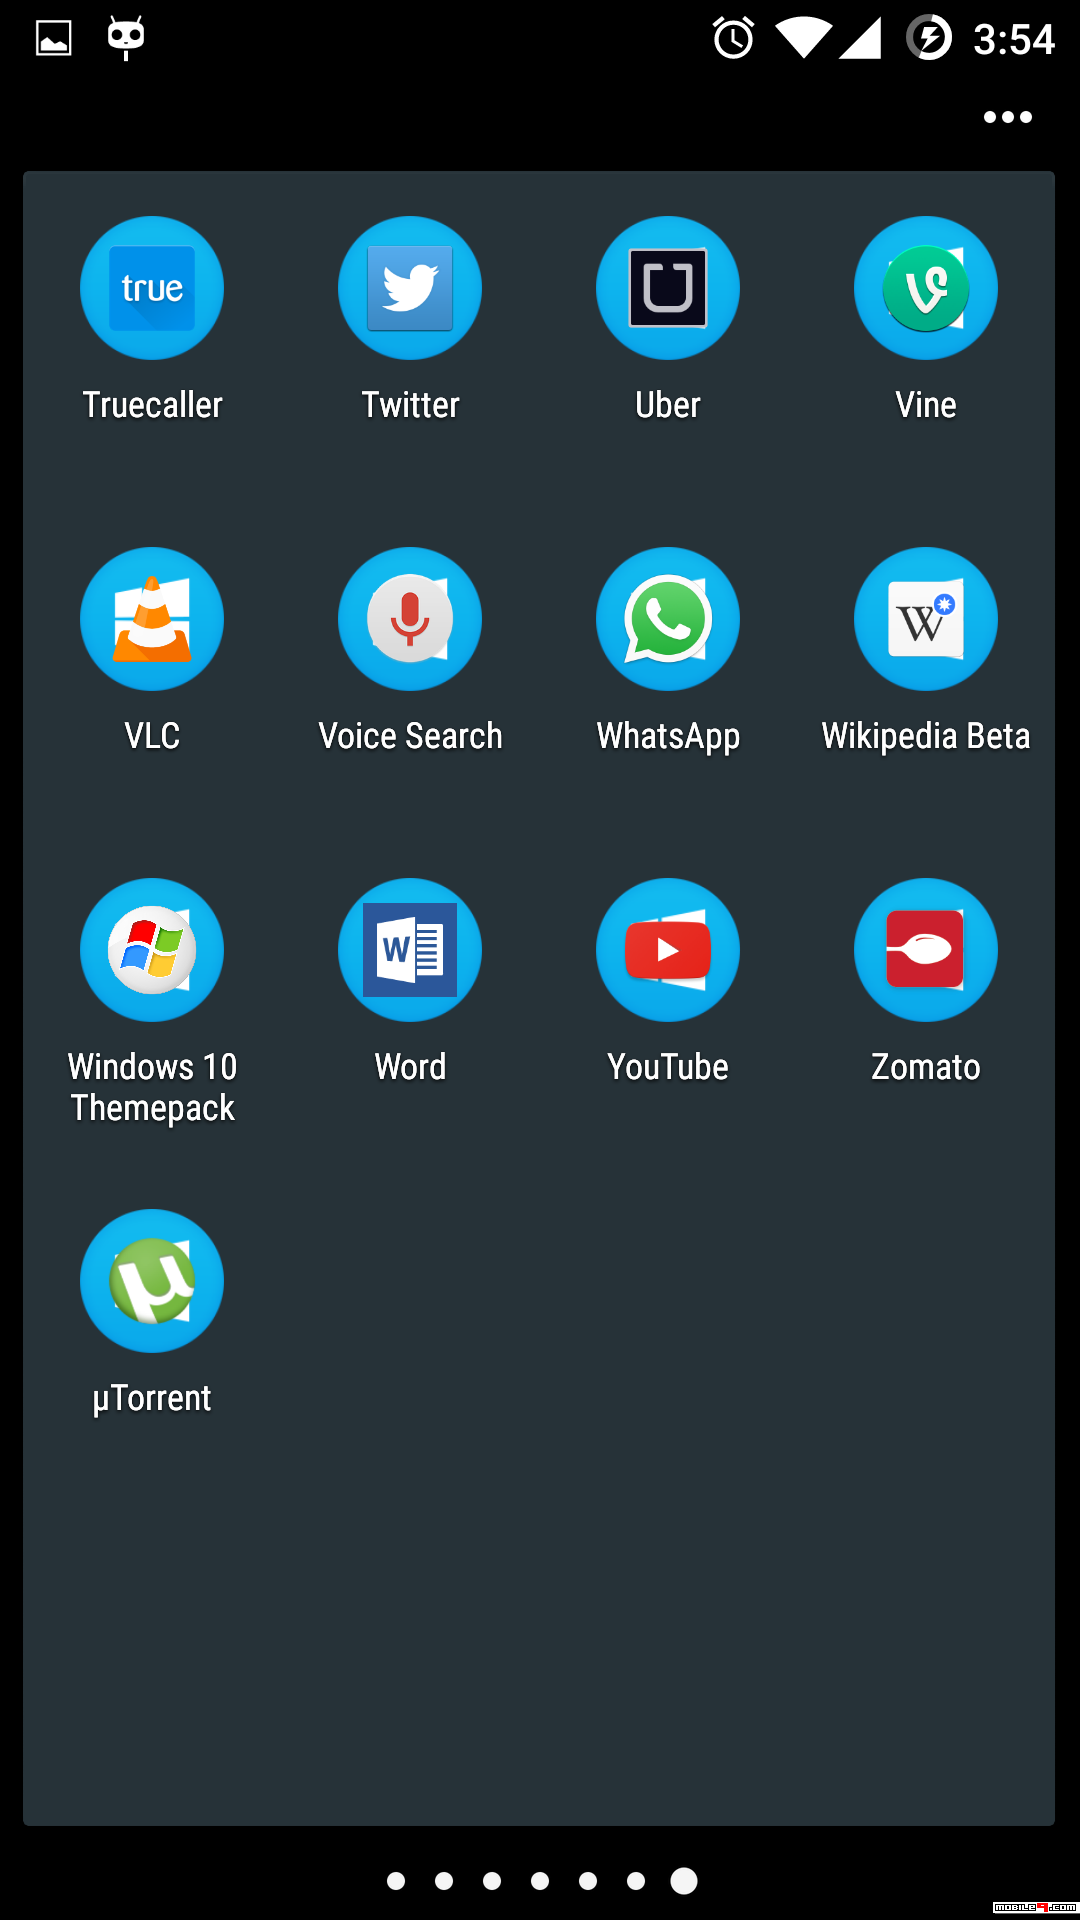 launcher android windows 10